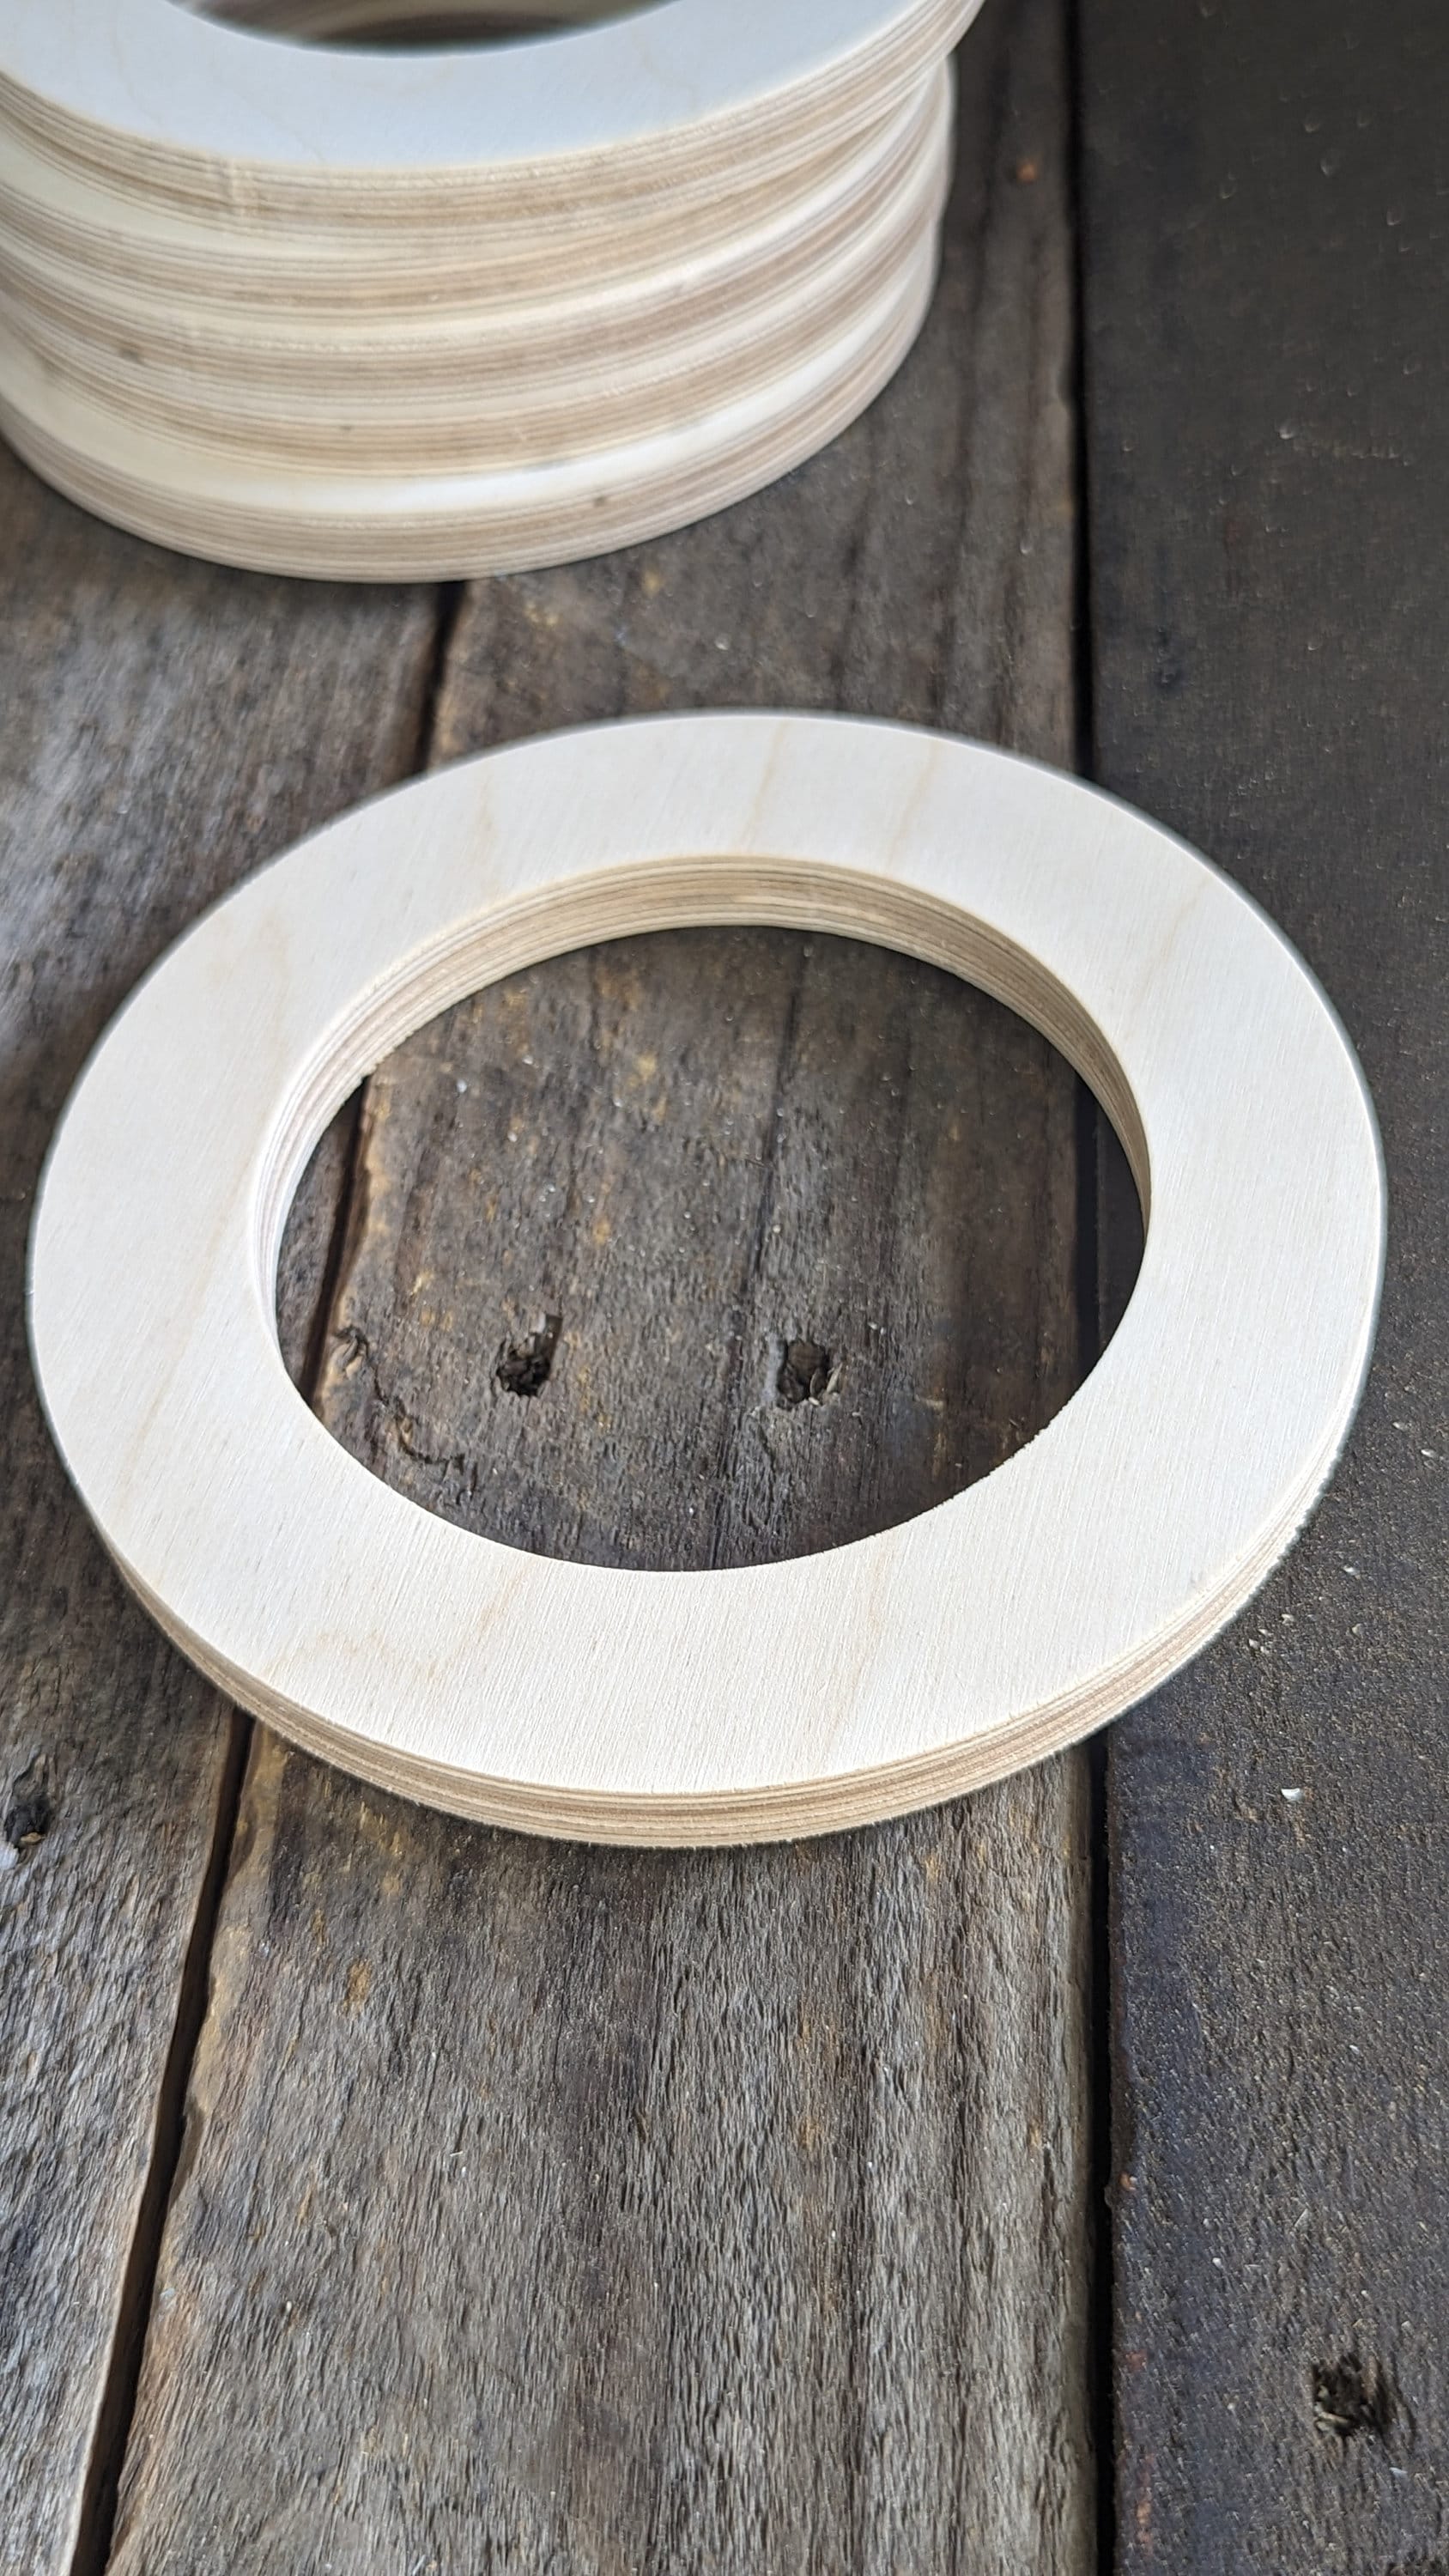 Affordable wooden rings For Sale, Craft Supplies & Tools